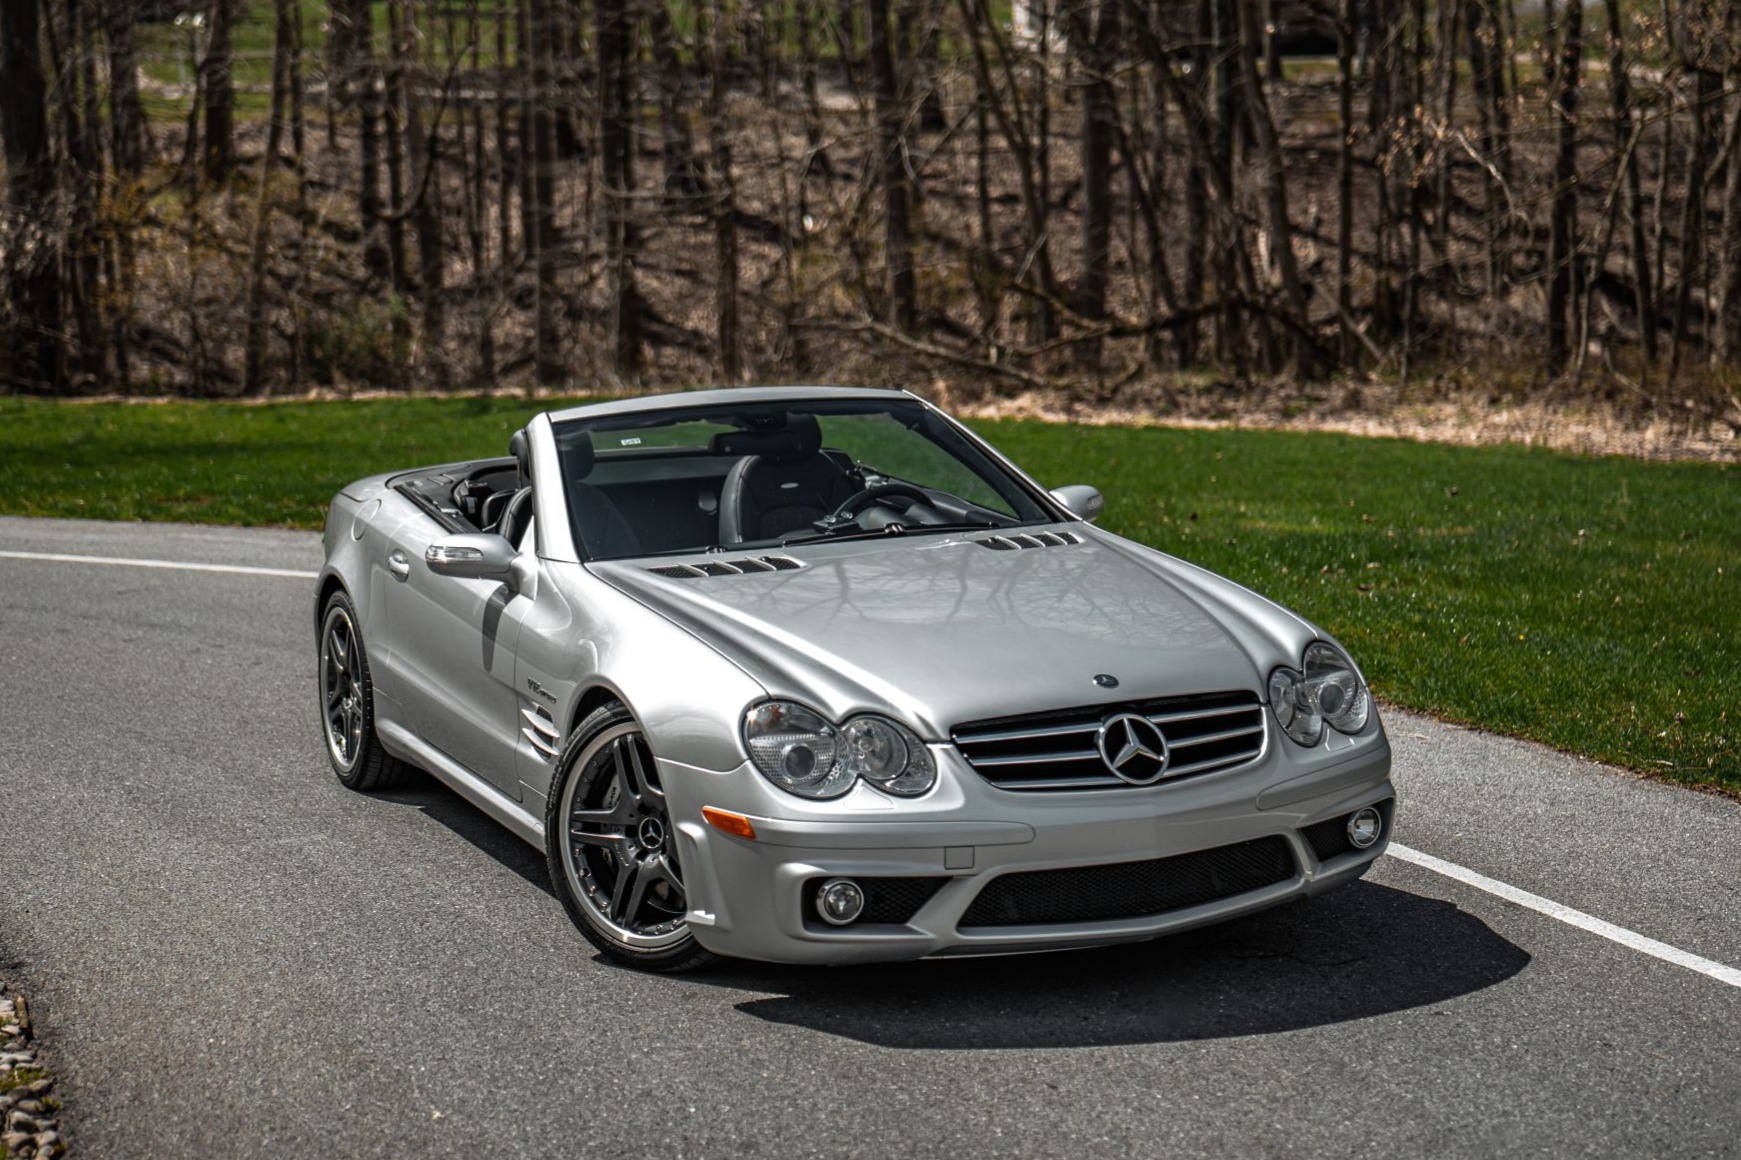 Used 40k-Mile 2008 Mercedes-Benz SL65 AMG Review